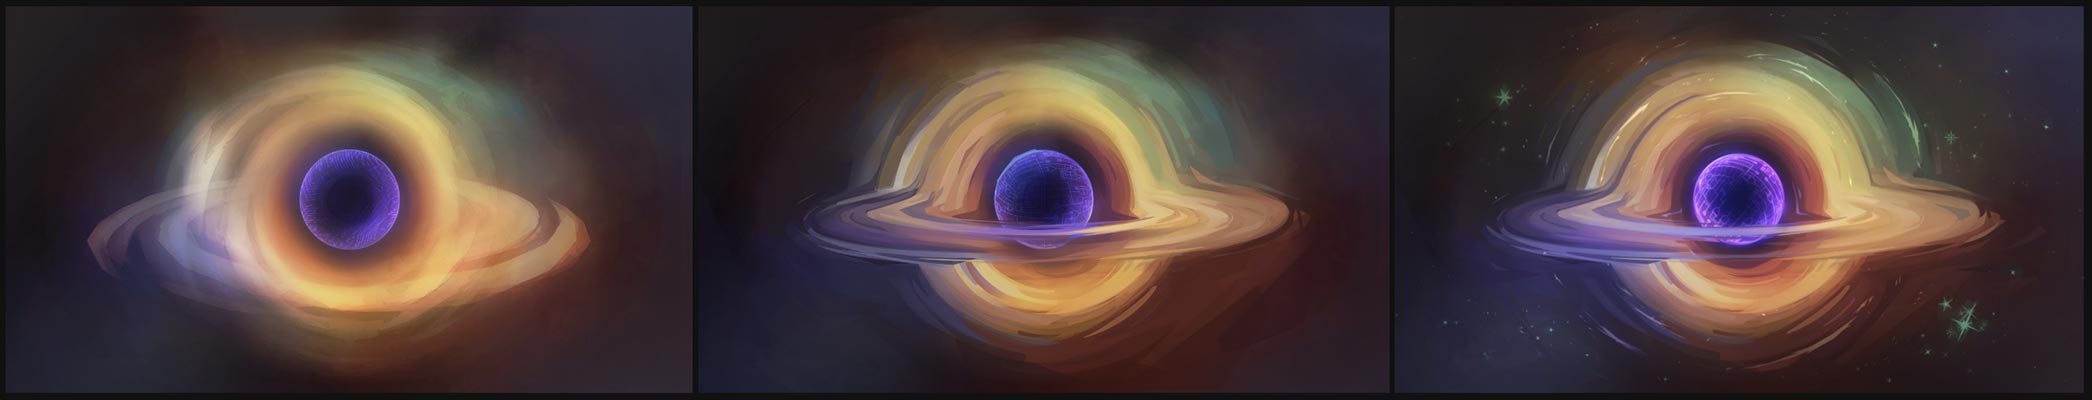 Process, 3 stages: Stylized illustration of a black hole in space with glowing purple circuitry wrapping the inner sphere.